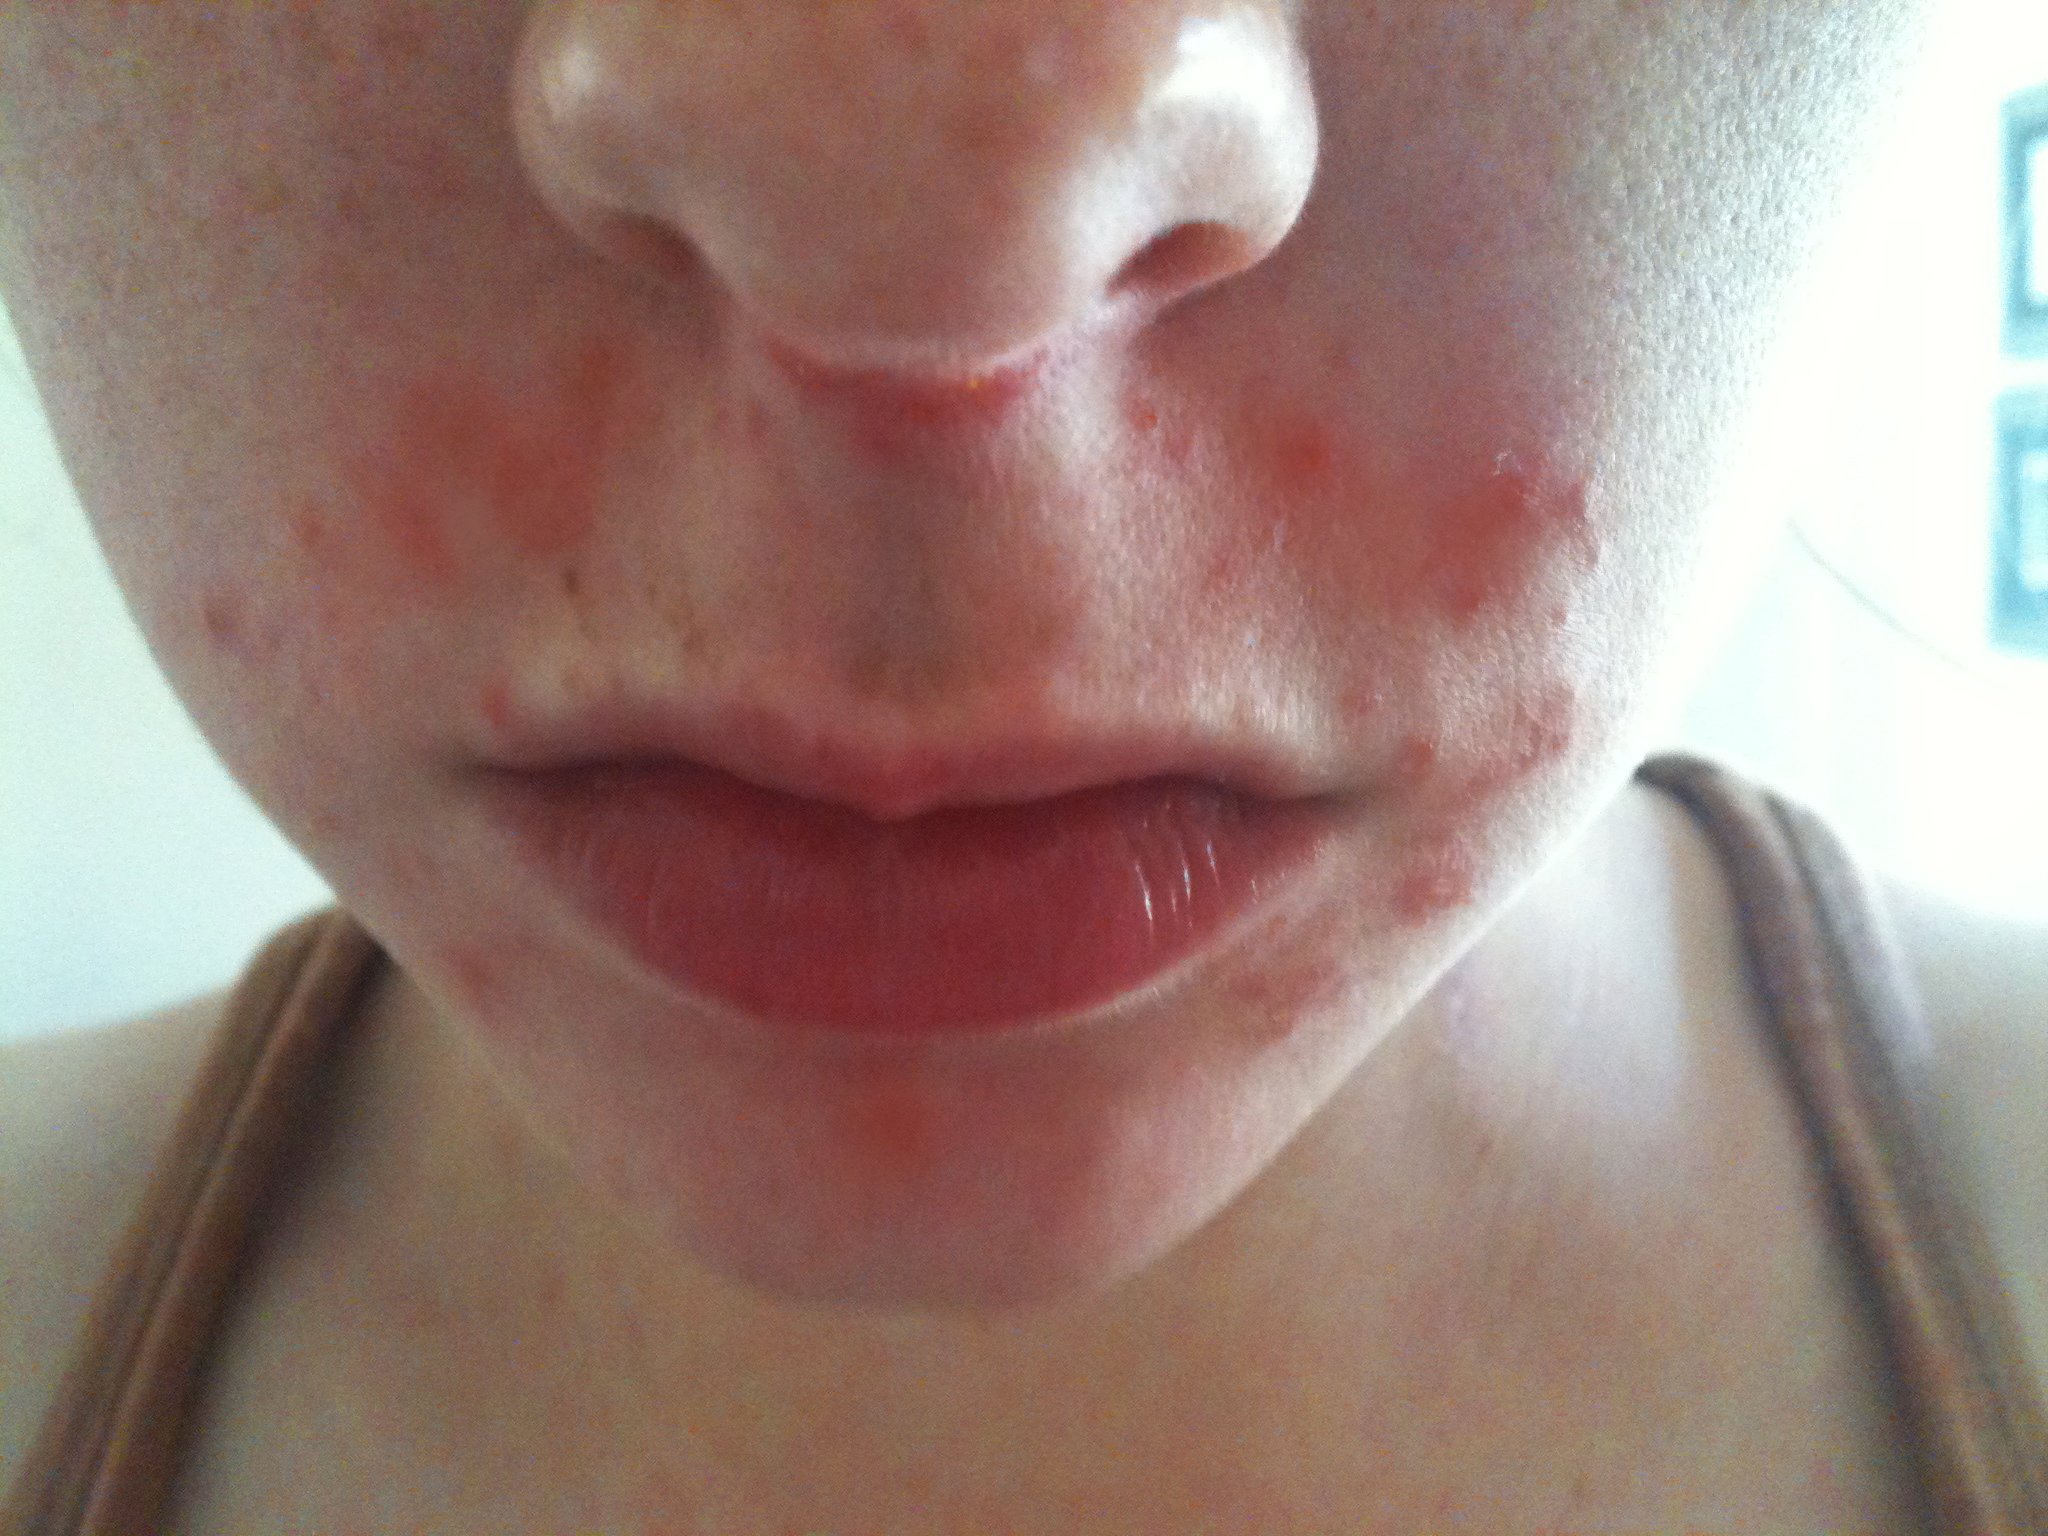 i have had persistent perioral dermatitis around my nose and